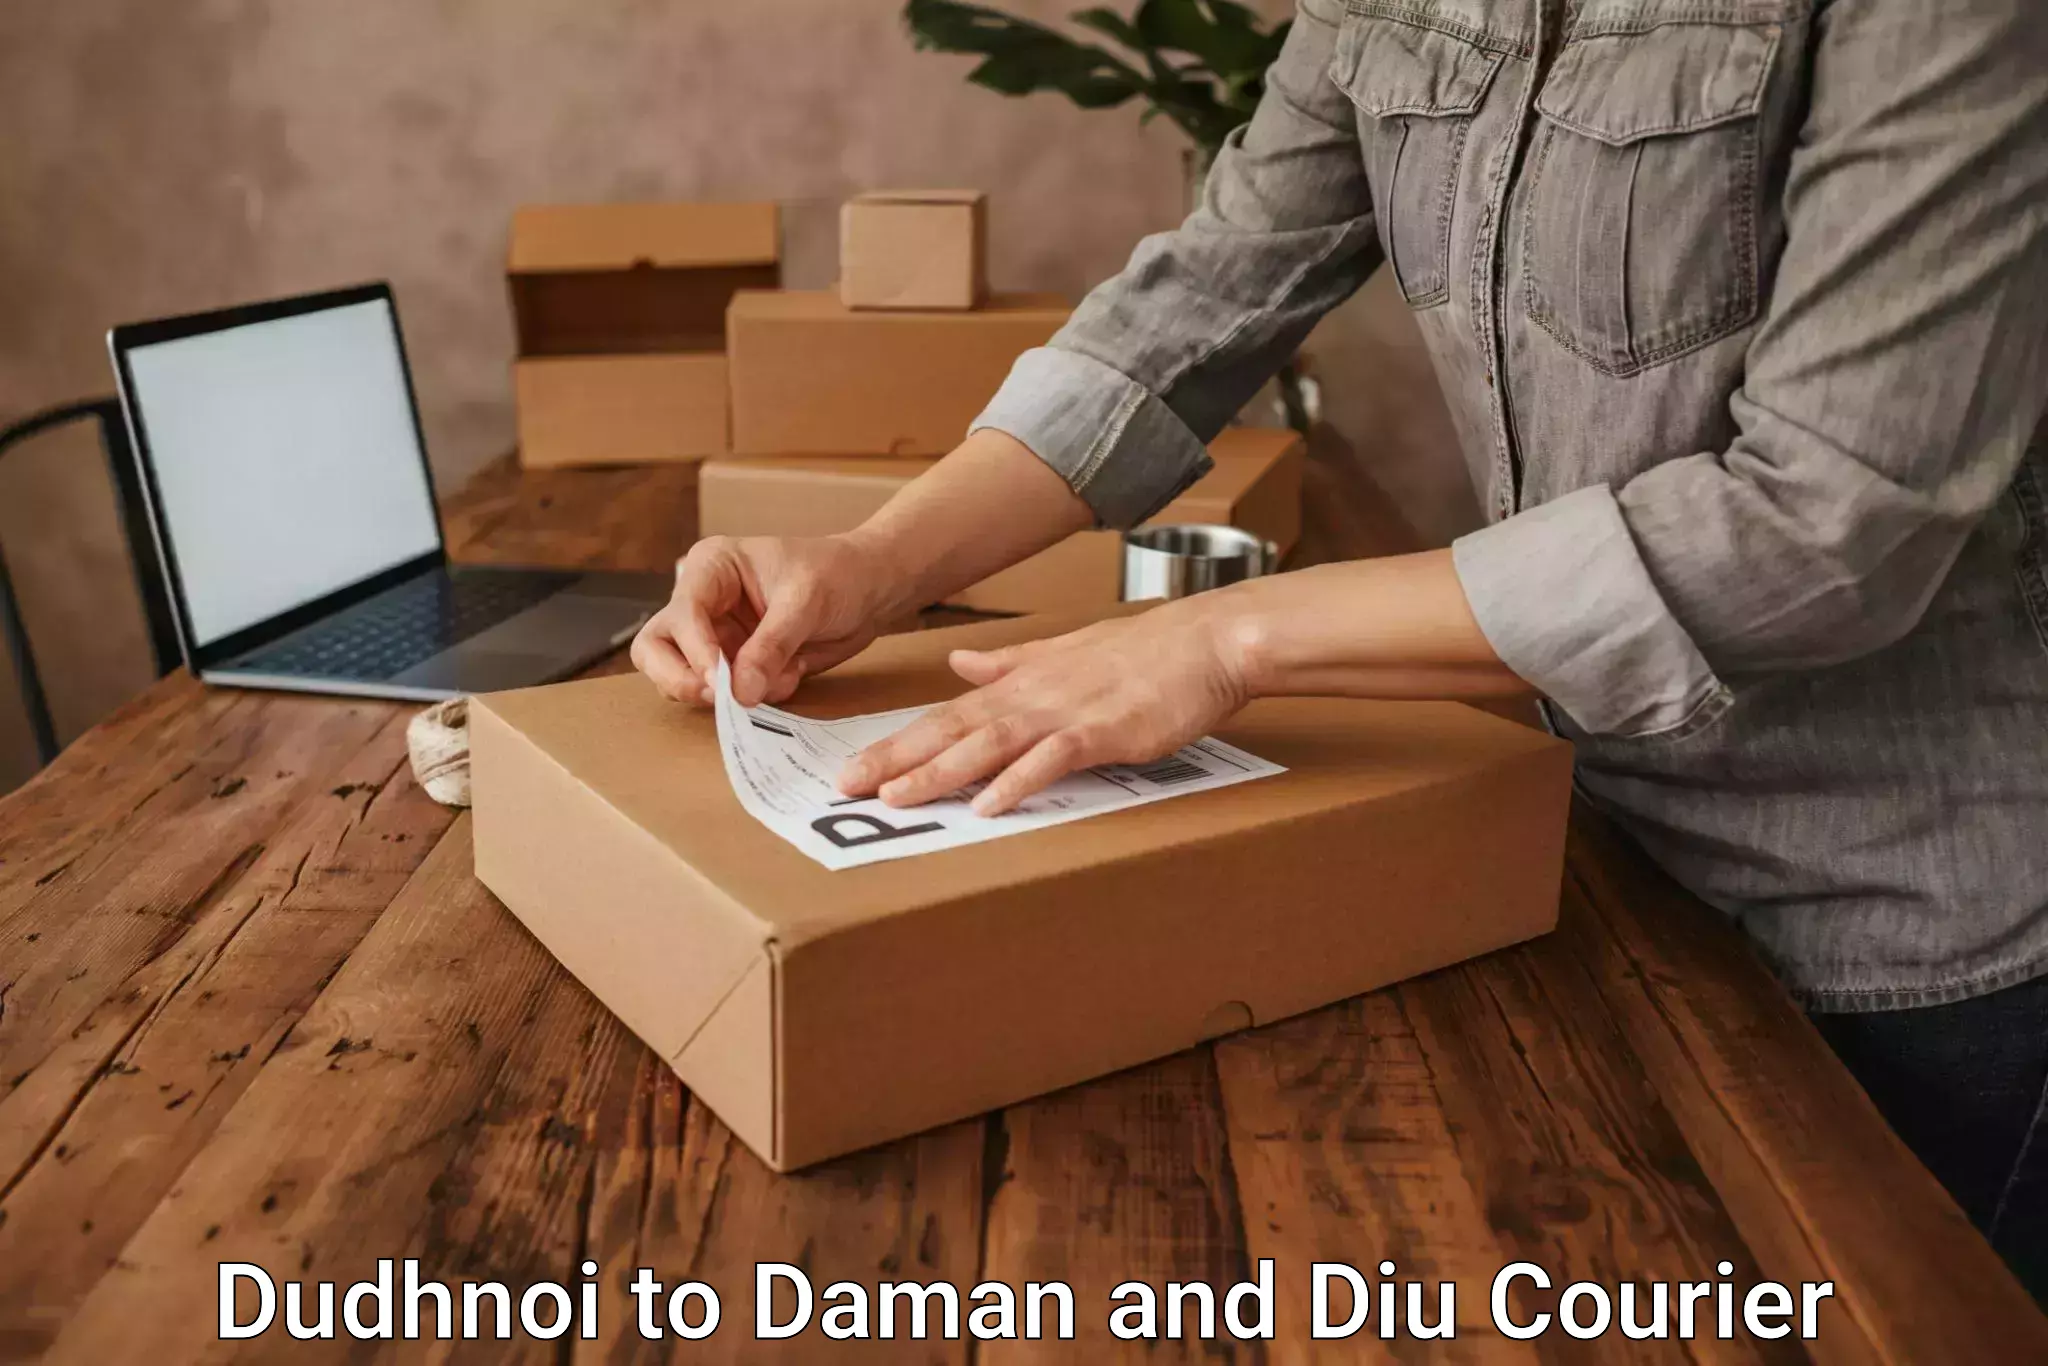 Enhanced shipping experience in Dudhnoi to Diu